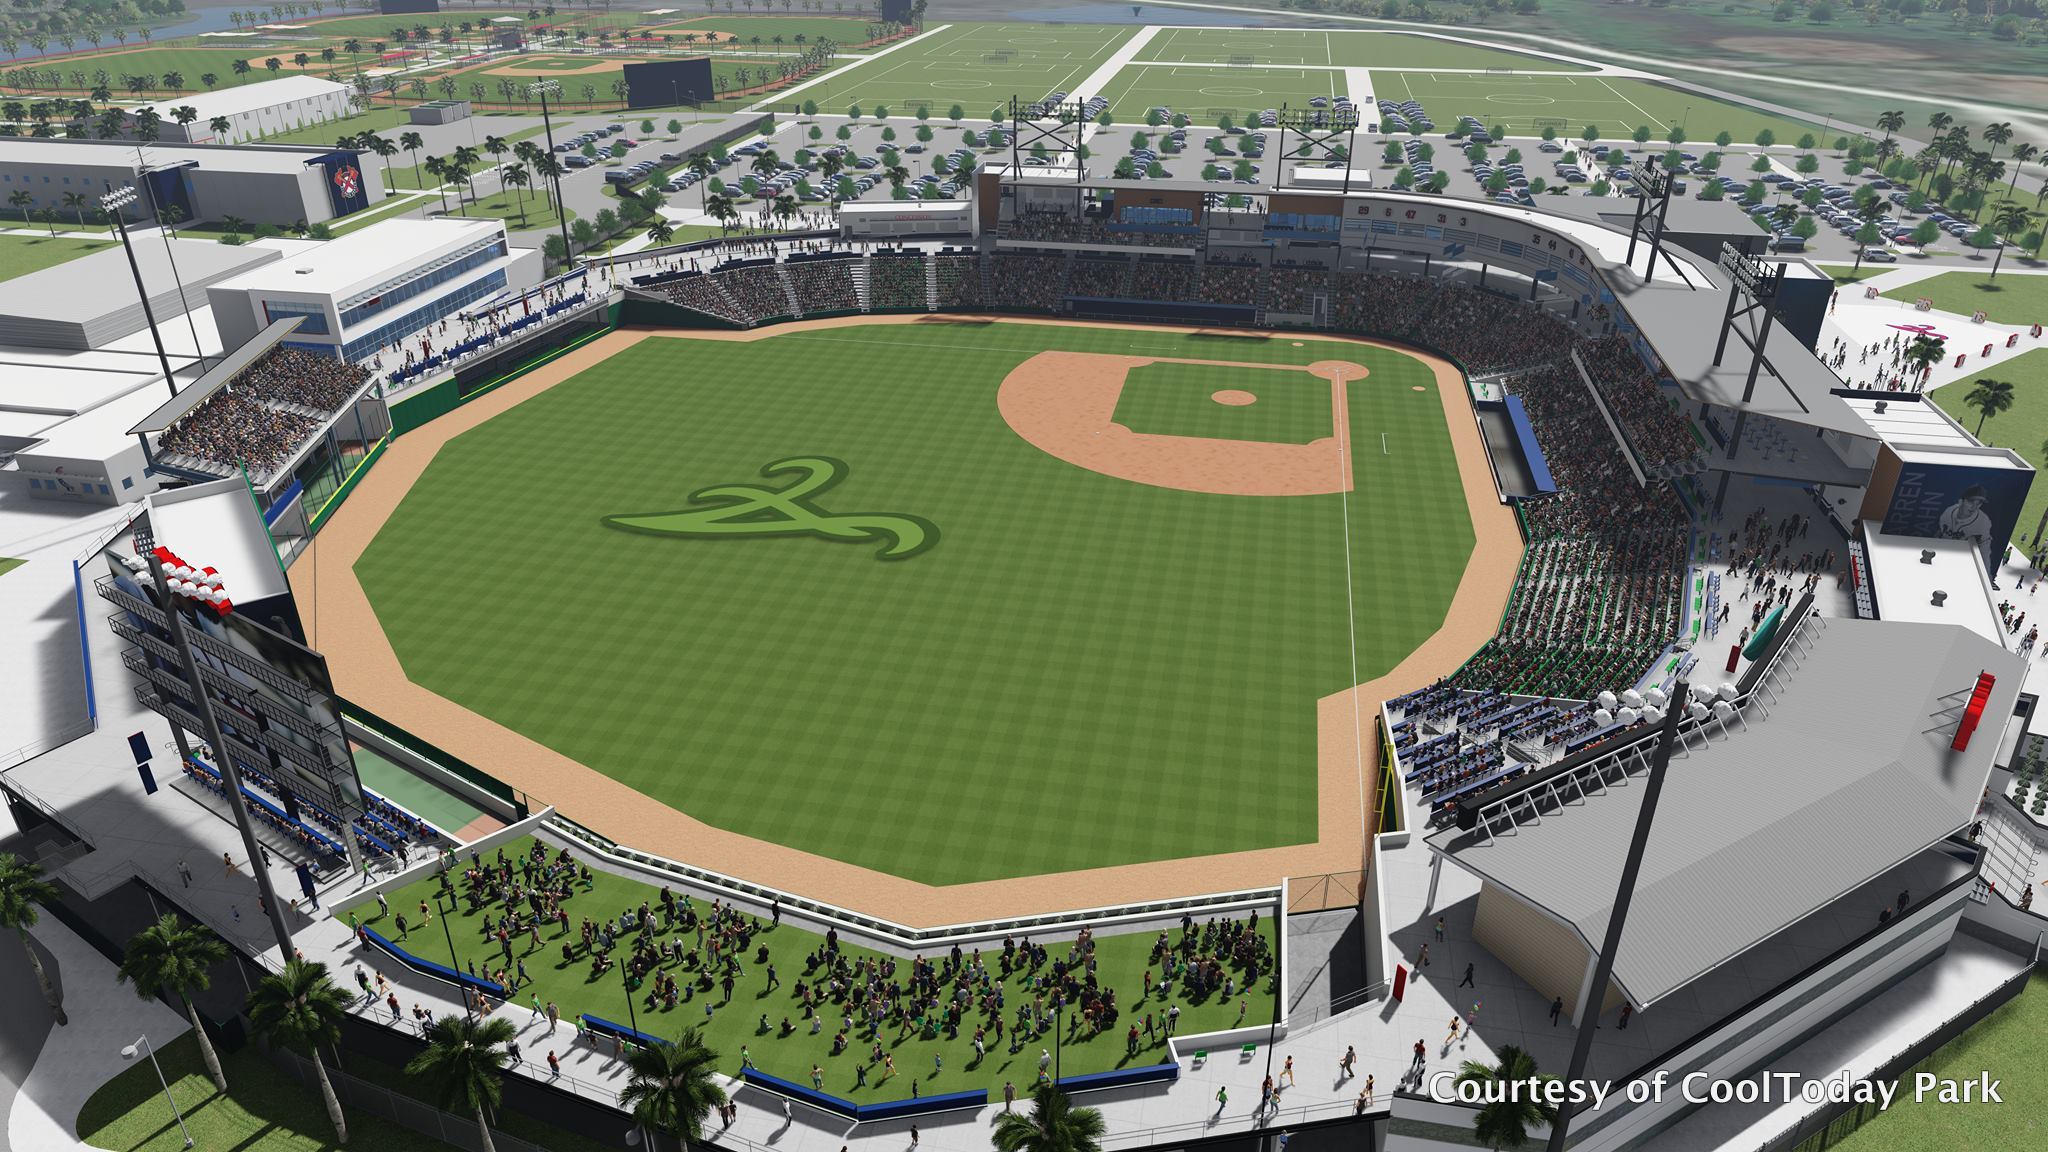 Ballpark Preview Braves New Spring Training Complex, CoolToday Park